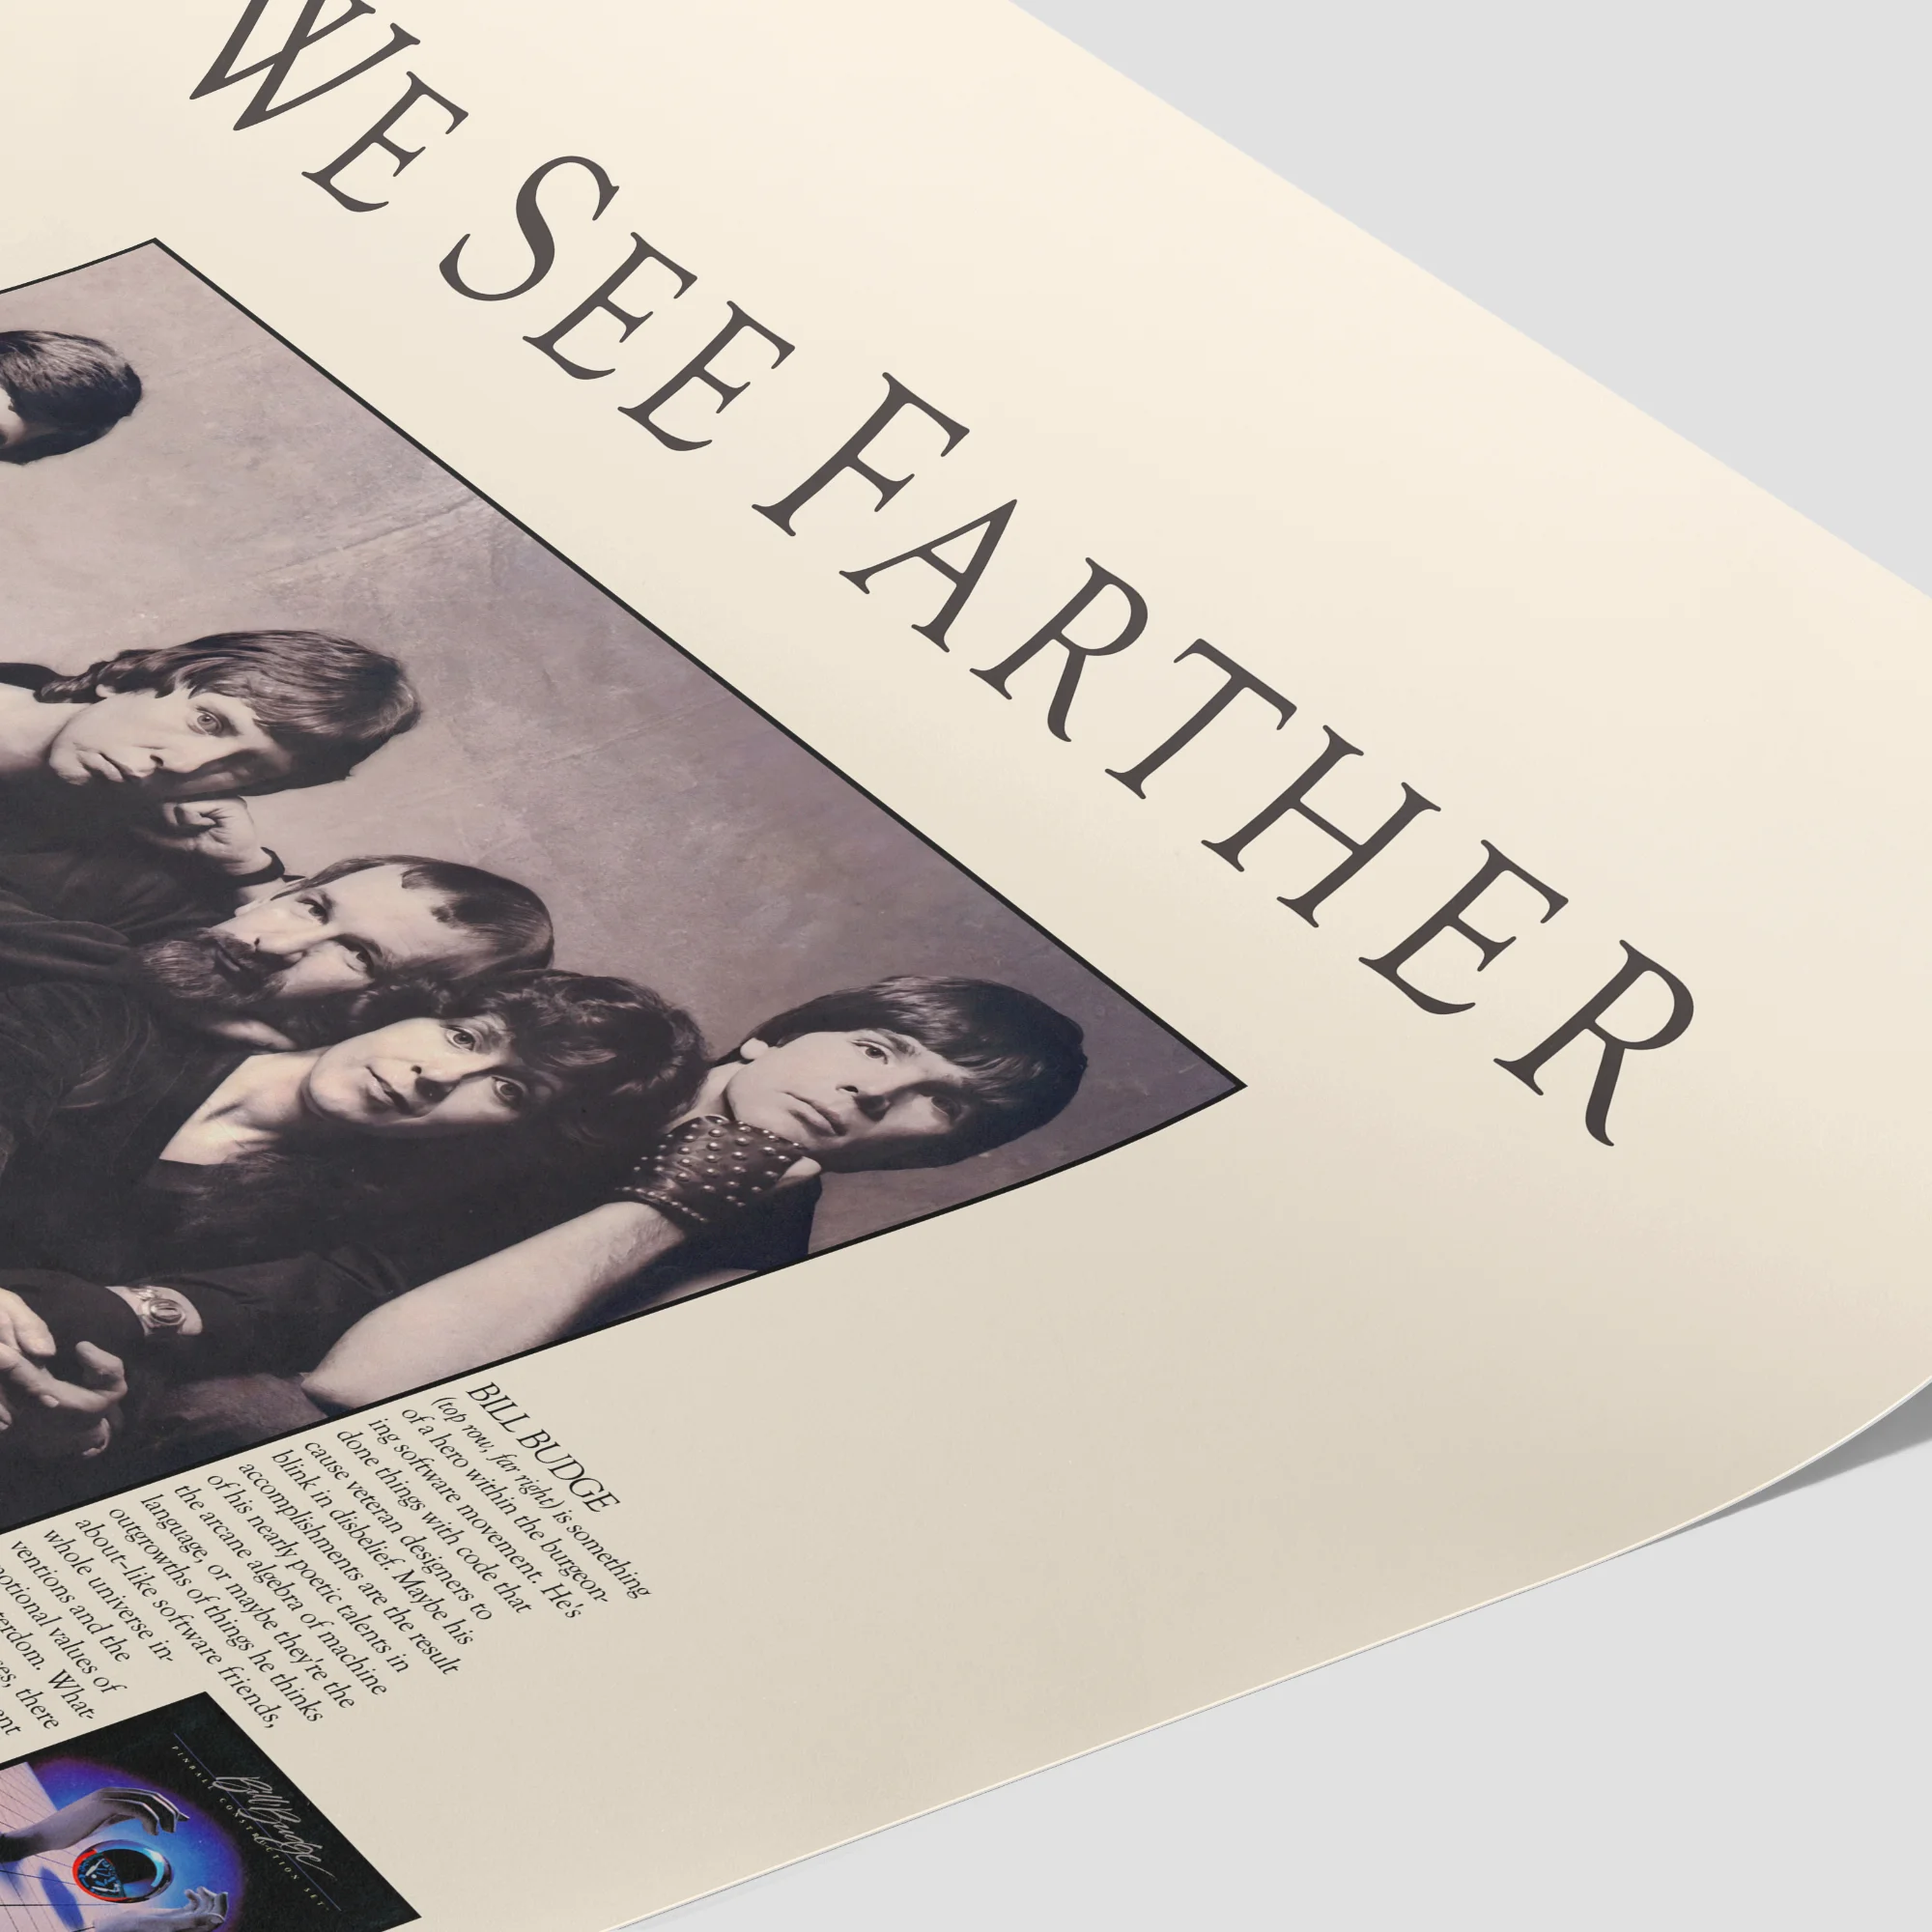 Album cover featuring vintage band portrait with "We See Farther" text.